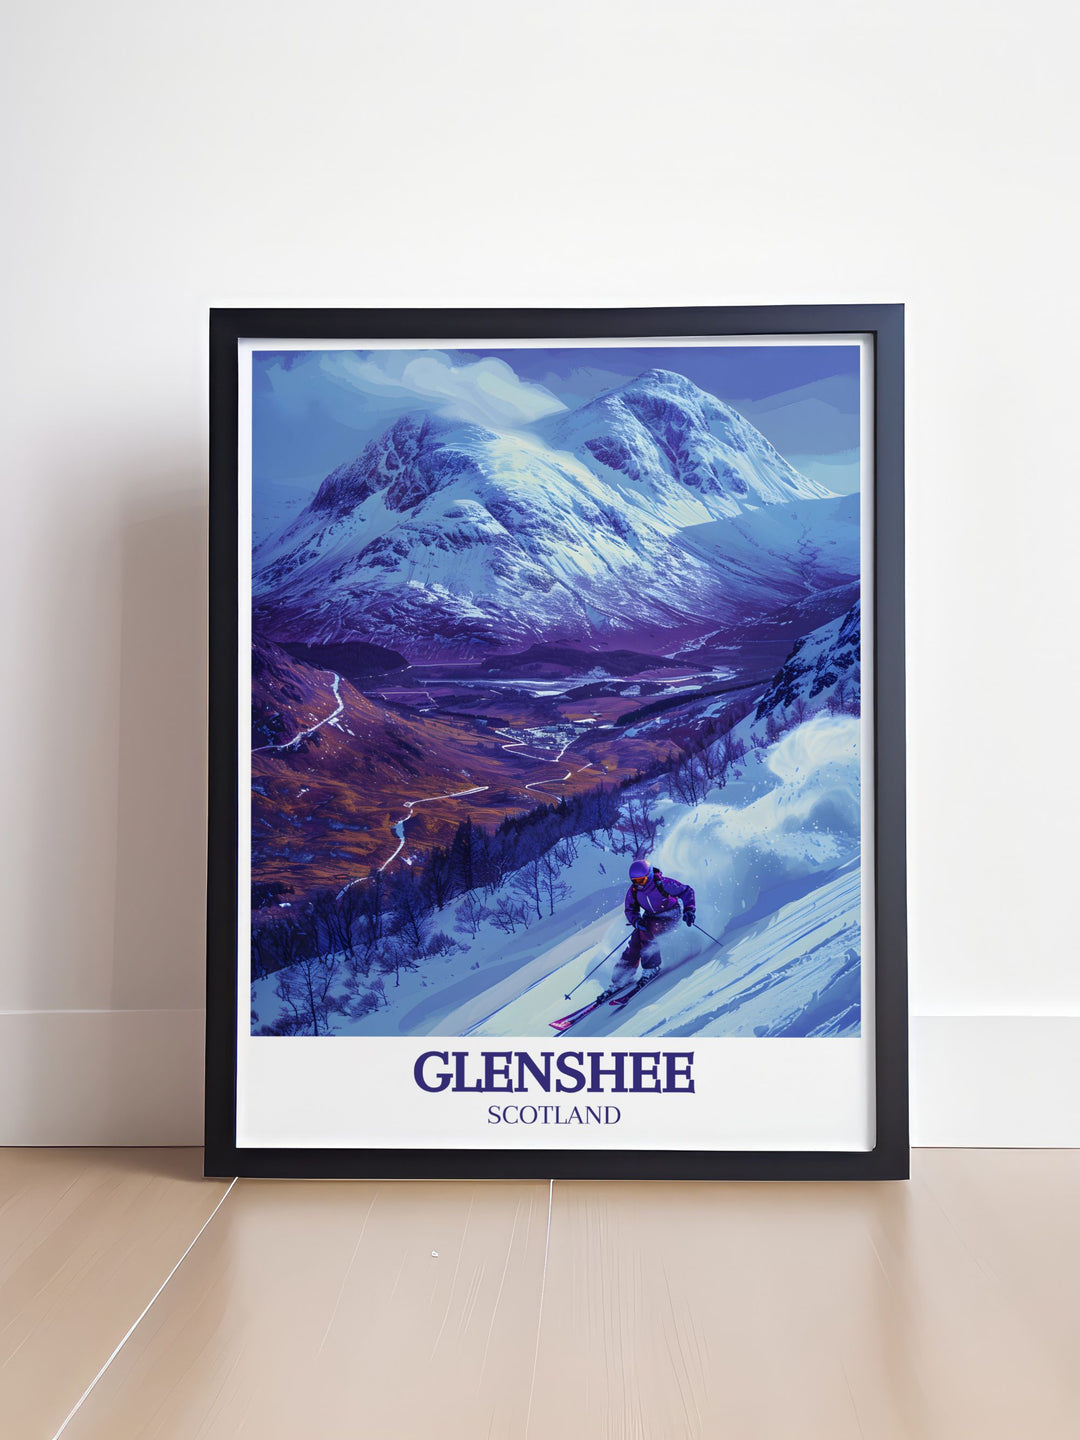 Celebrating the rich history of Glenshee, this poster features landmarks such as ancient cairns and historic trails. Ideal for history buffs, this artwork offers a glimpse into the fascinating heritage of Scotlands Highlands.